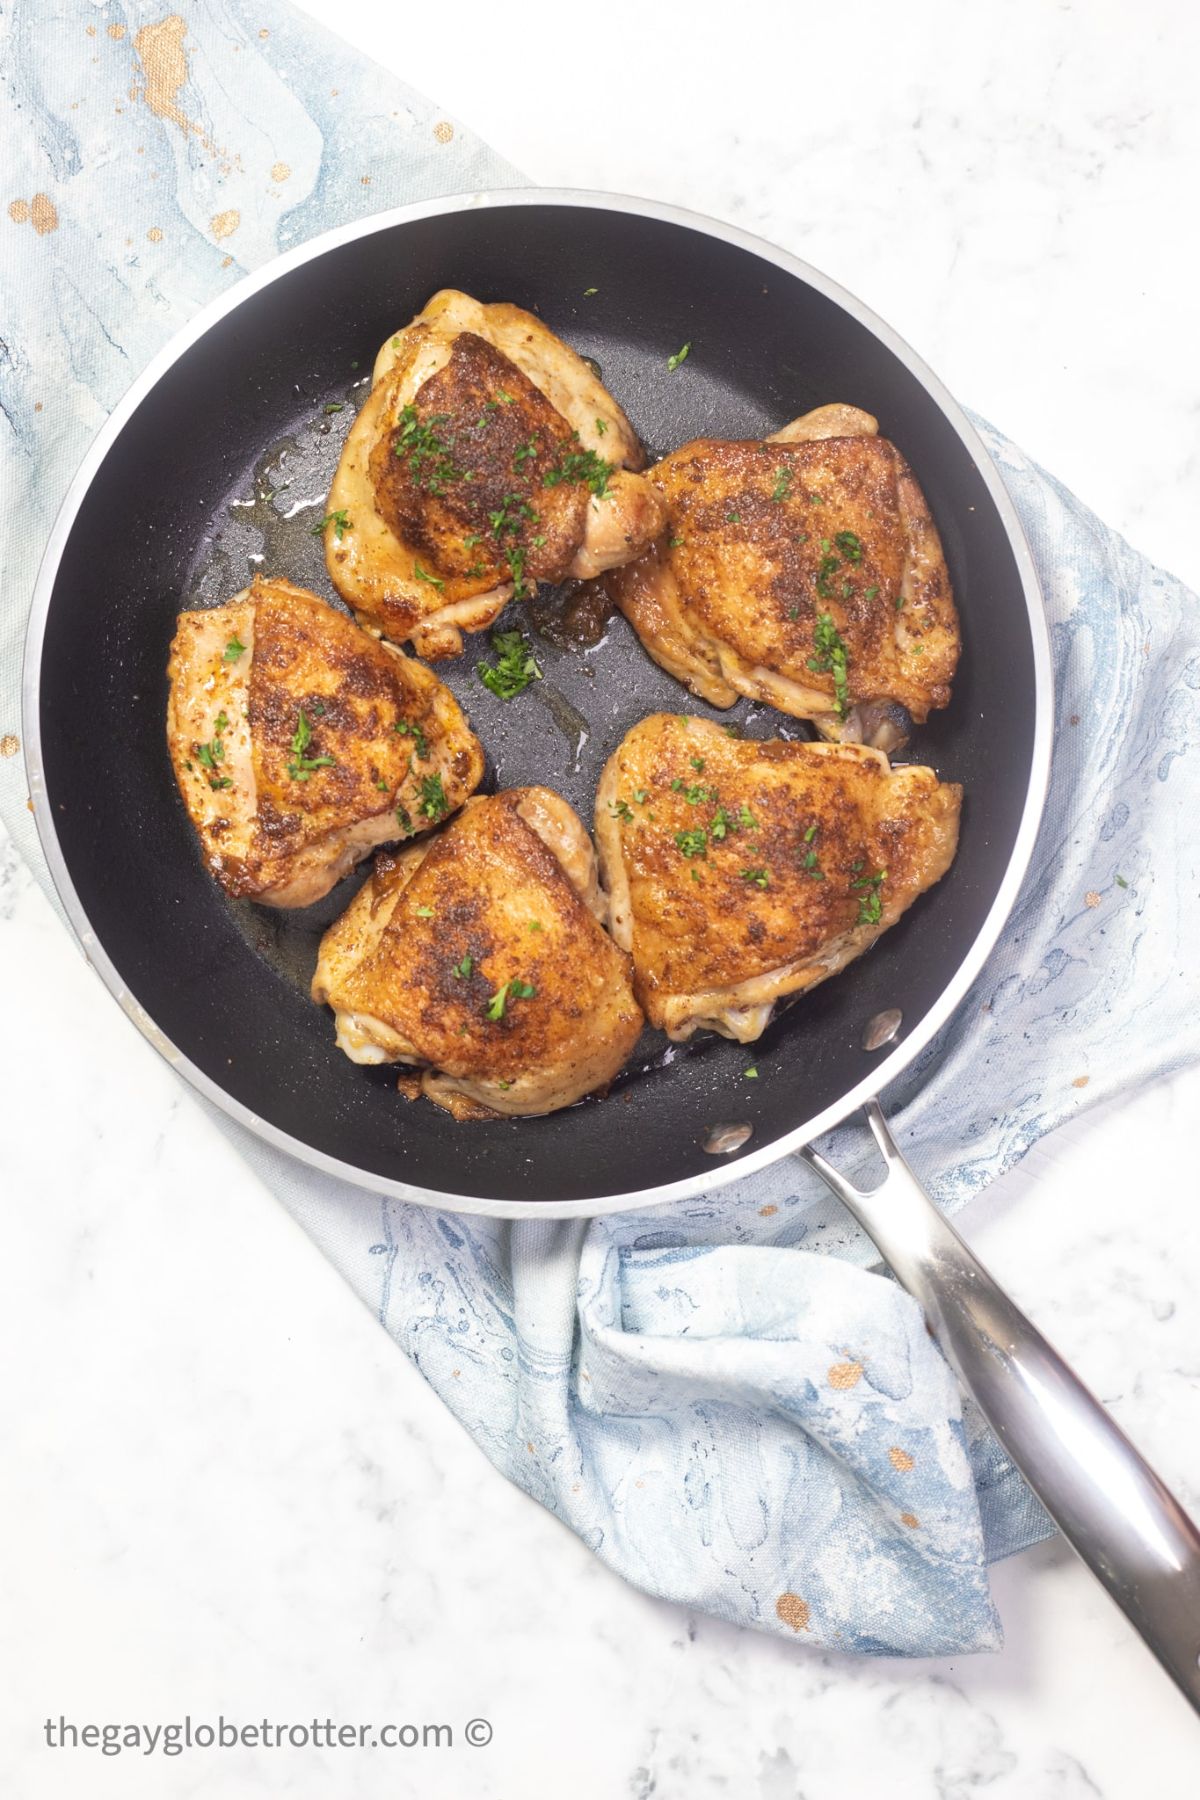 Flavorful old bay chicken thighs in a skillet.